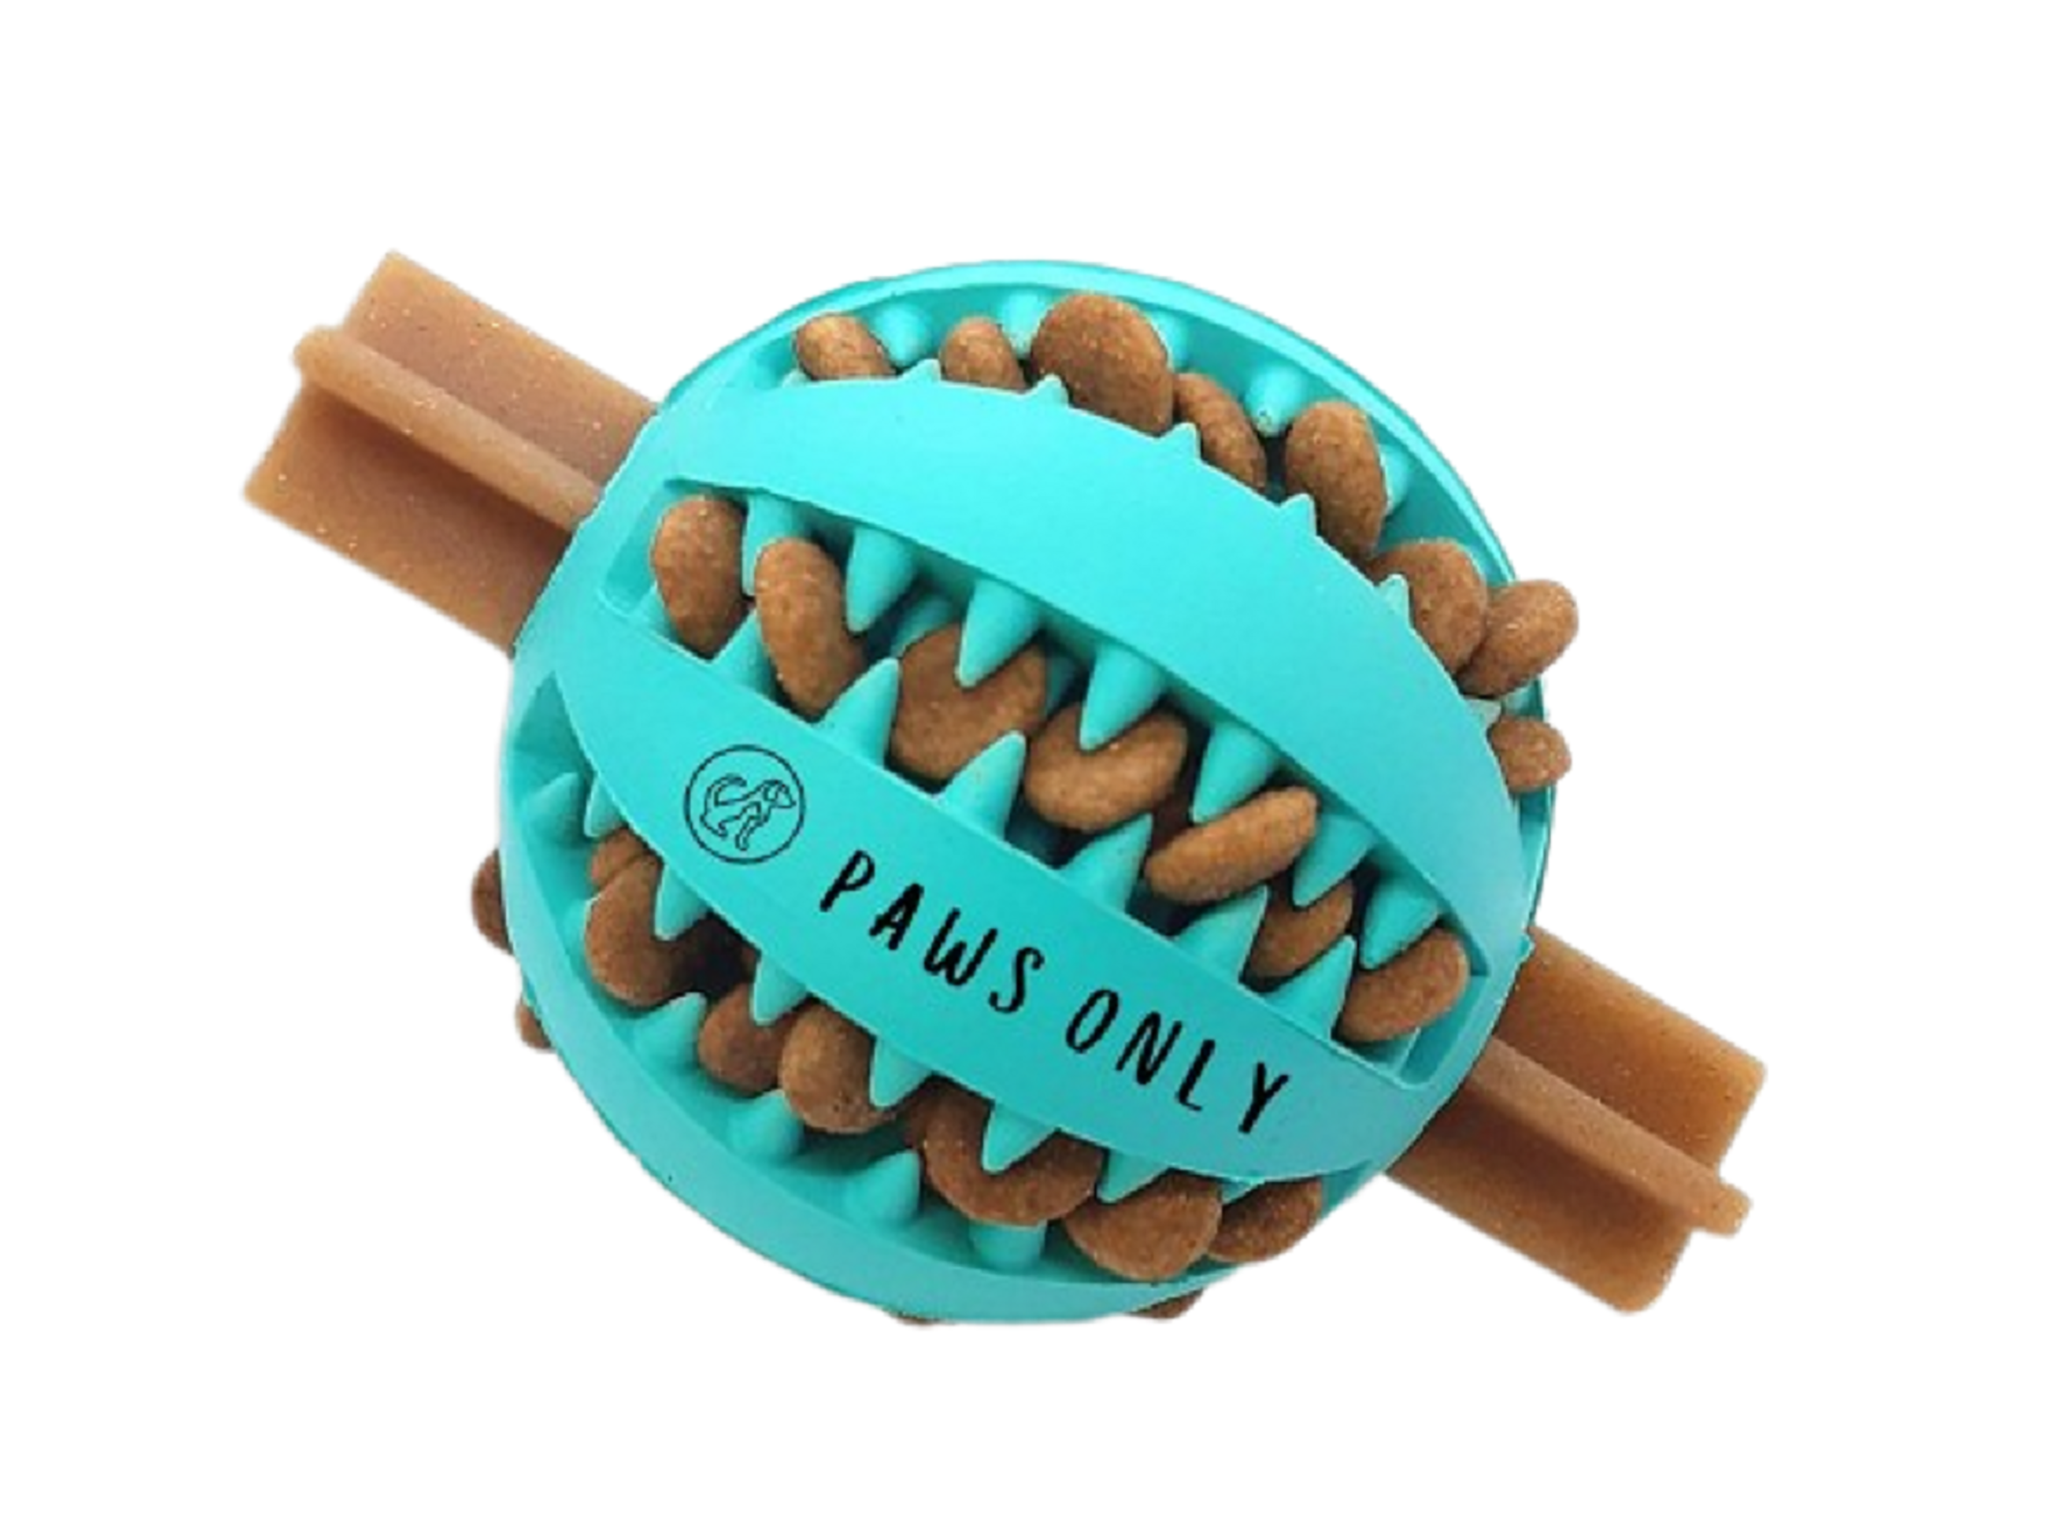 Paws Only dog treat toy